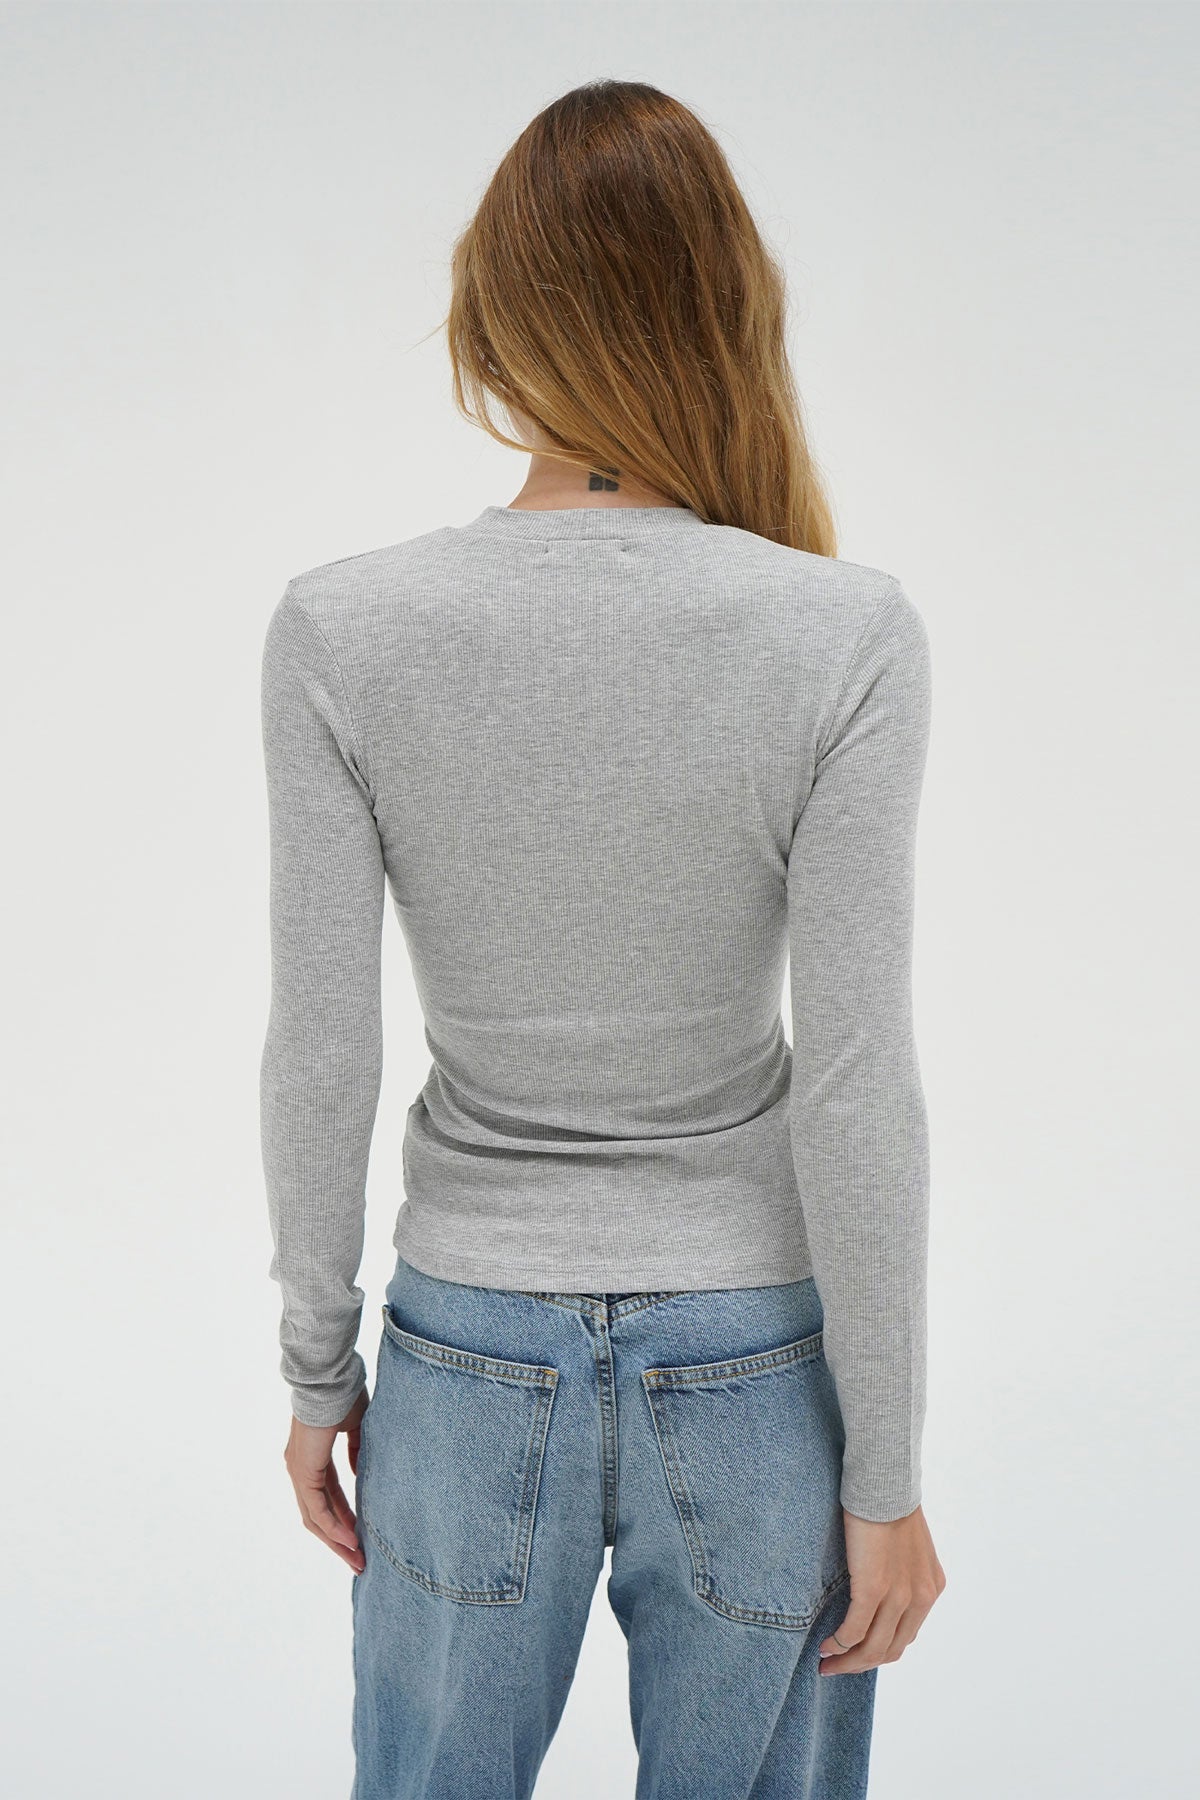 LNA Dalston Ribbed Long Sleeve in Heather Grey